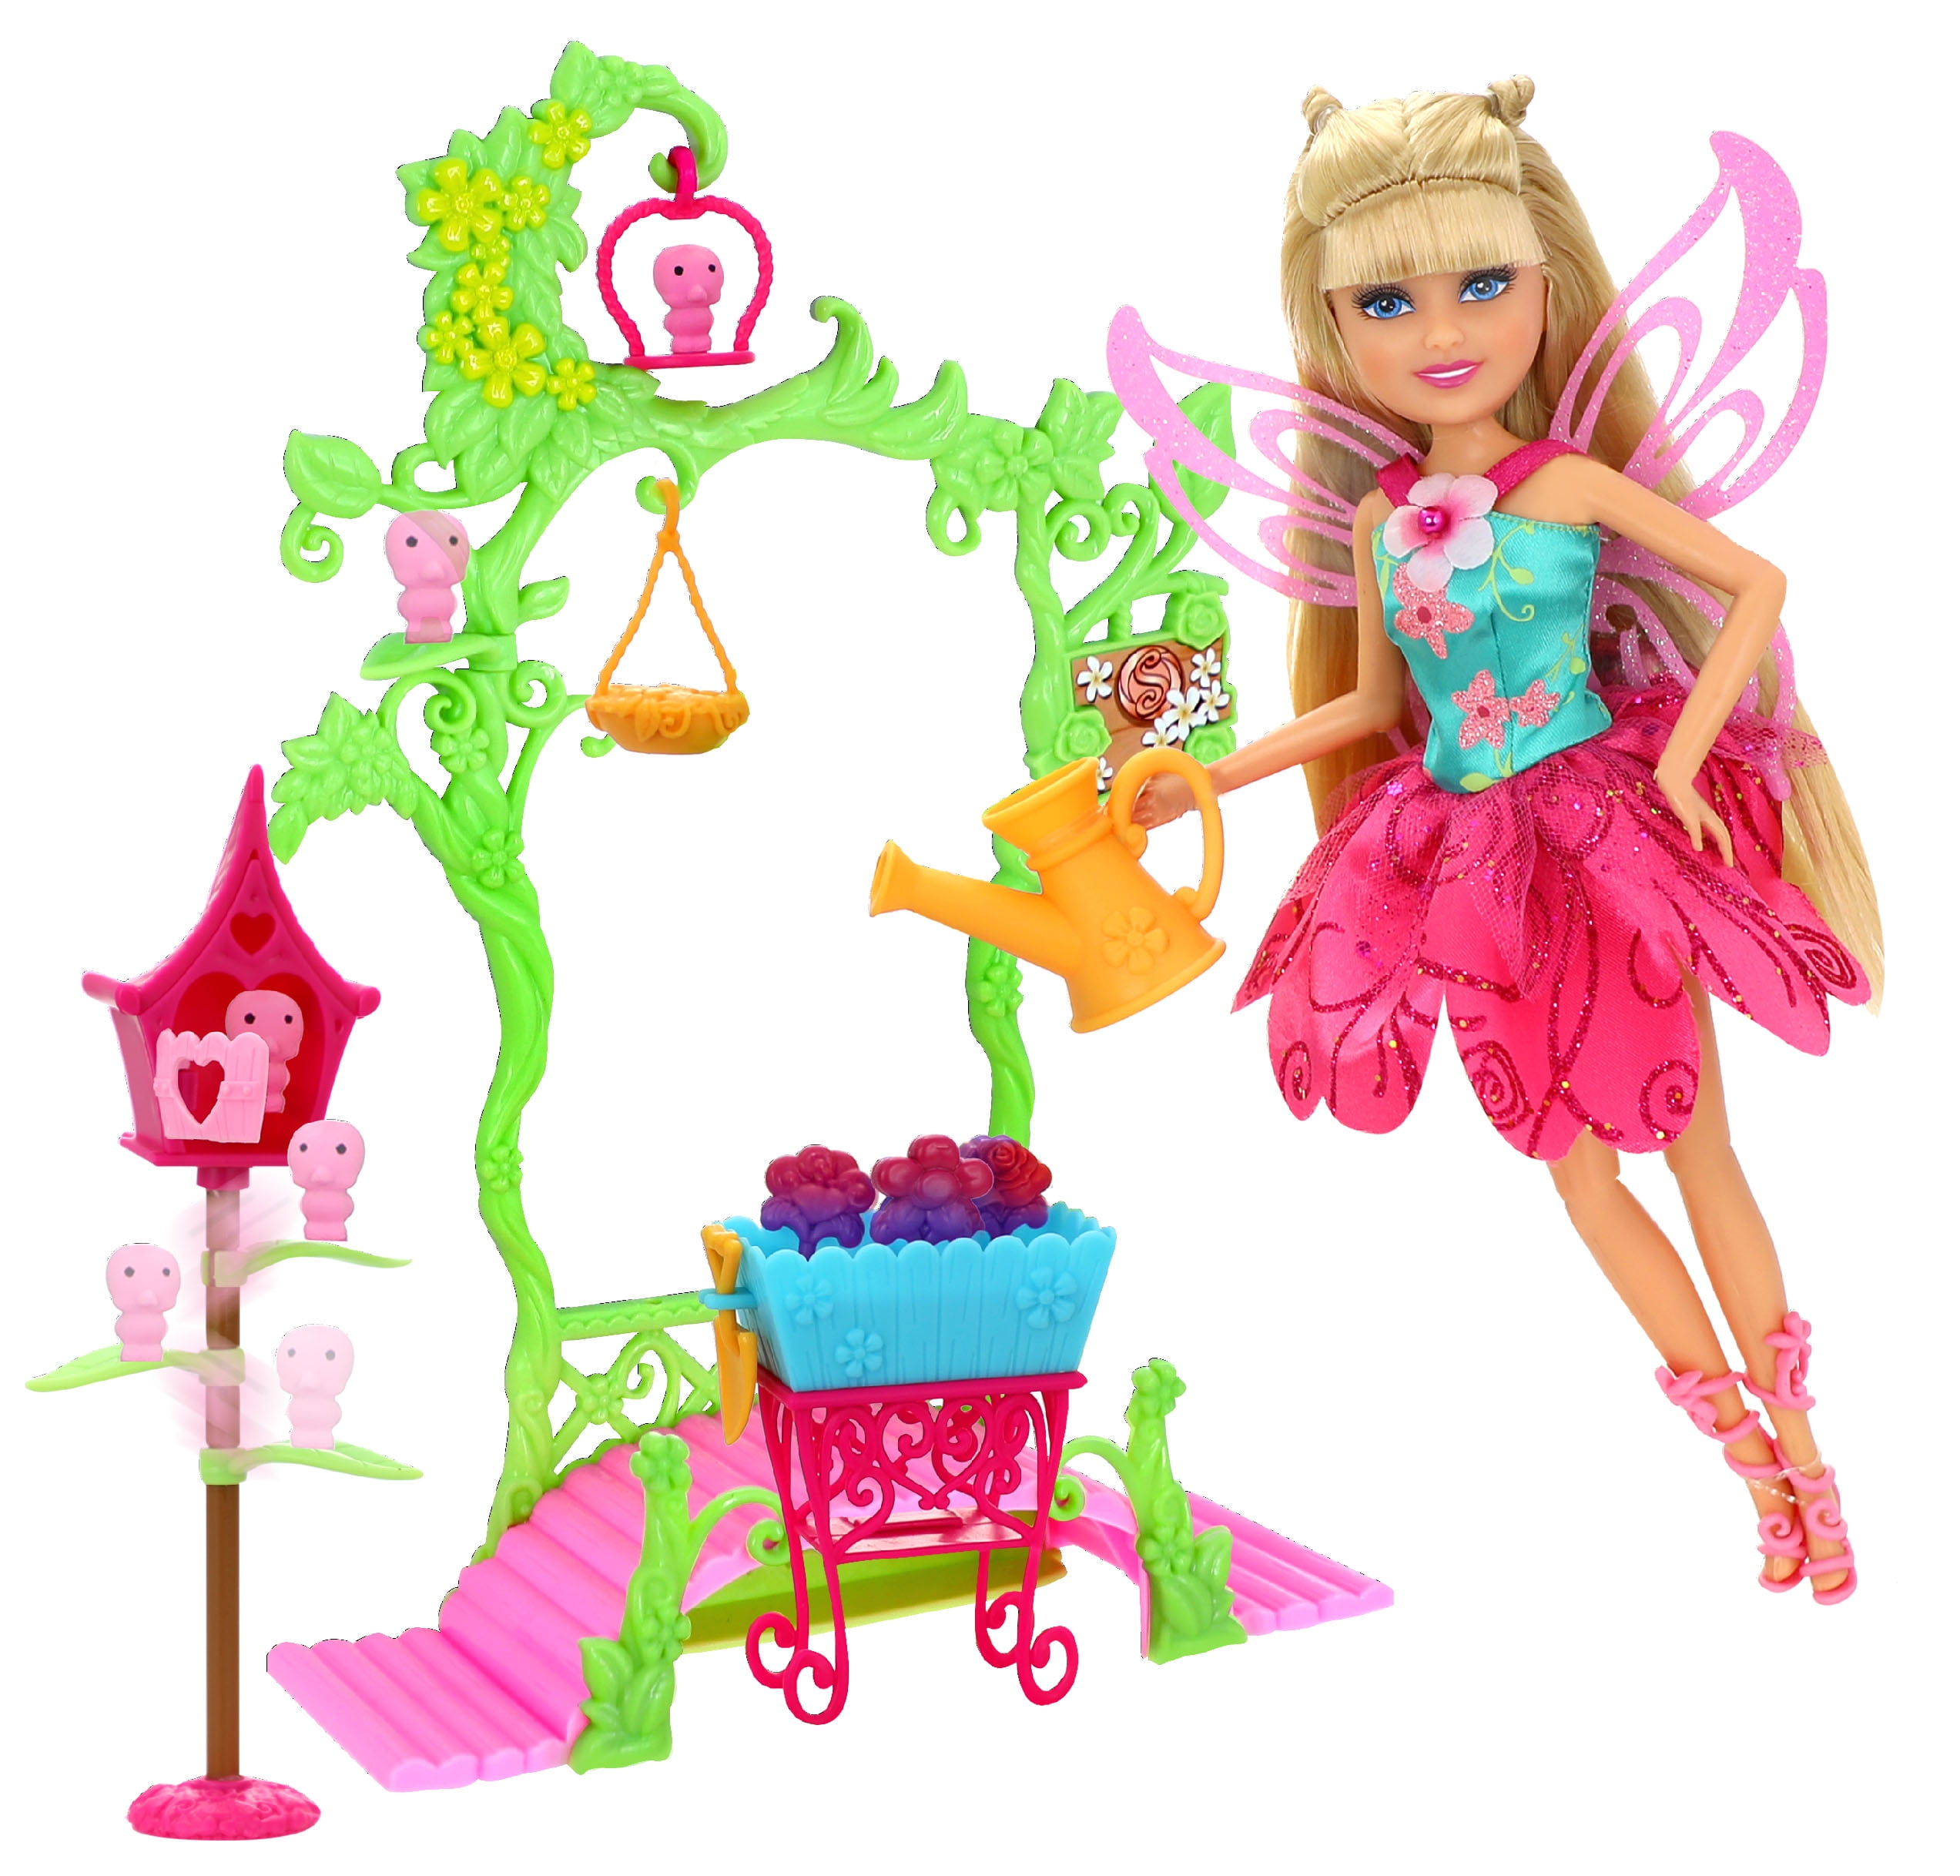 Sparkle Girlz from Zuru – The Perfect and Affordable Gift!